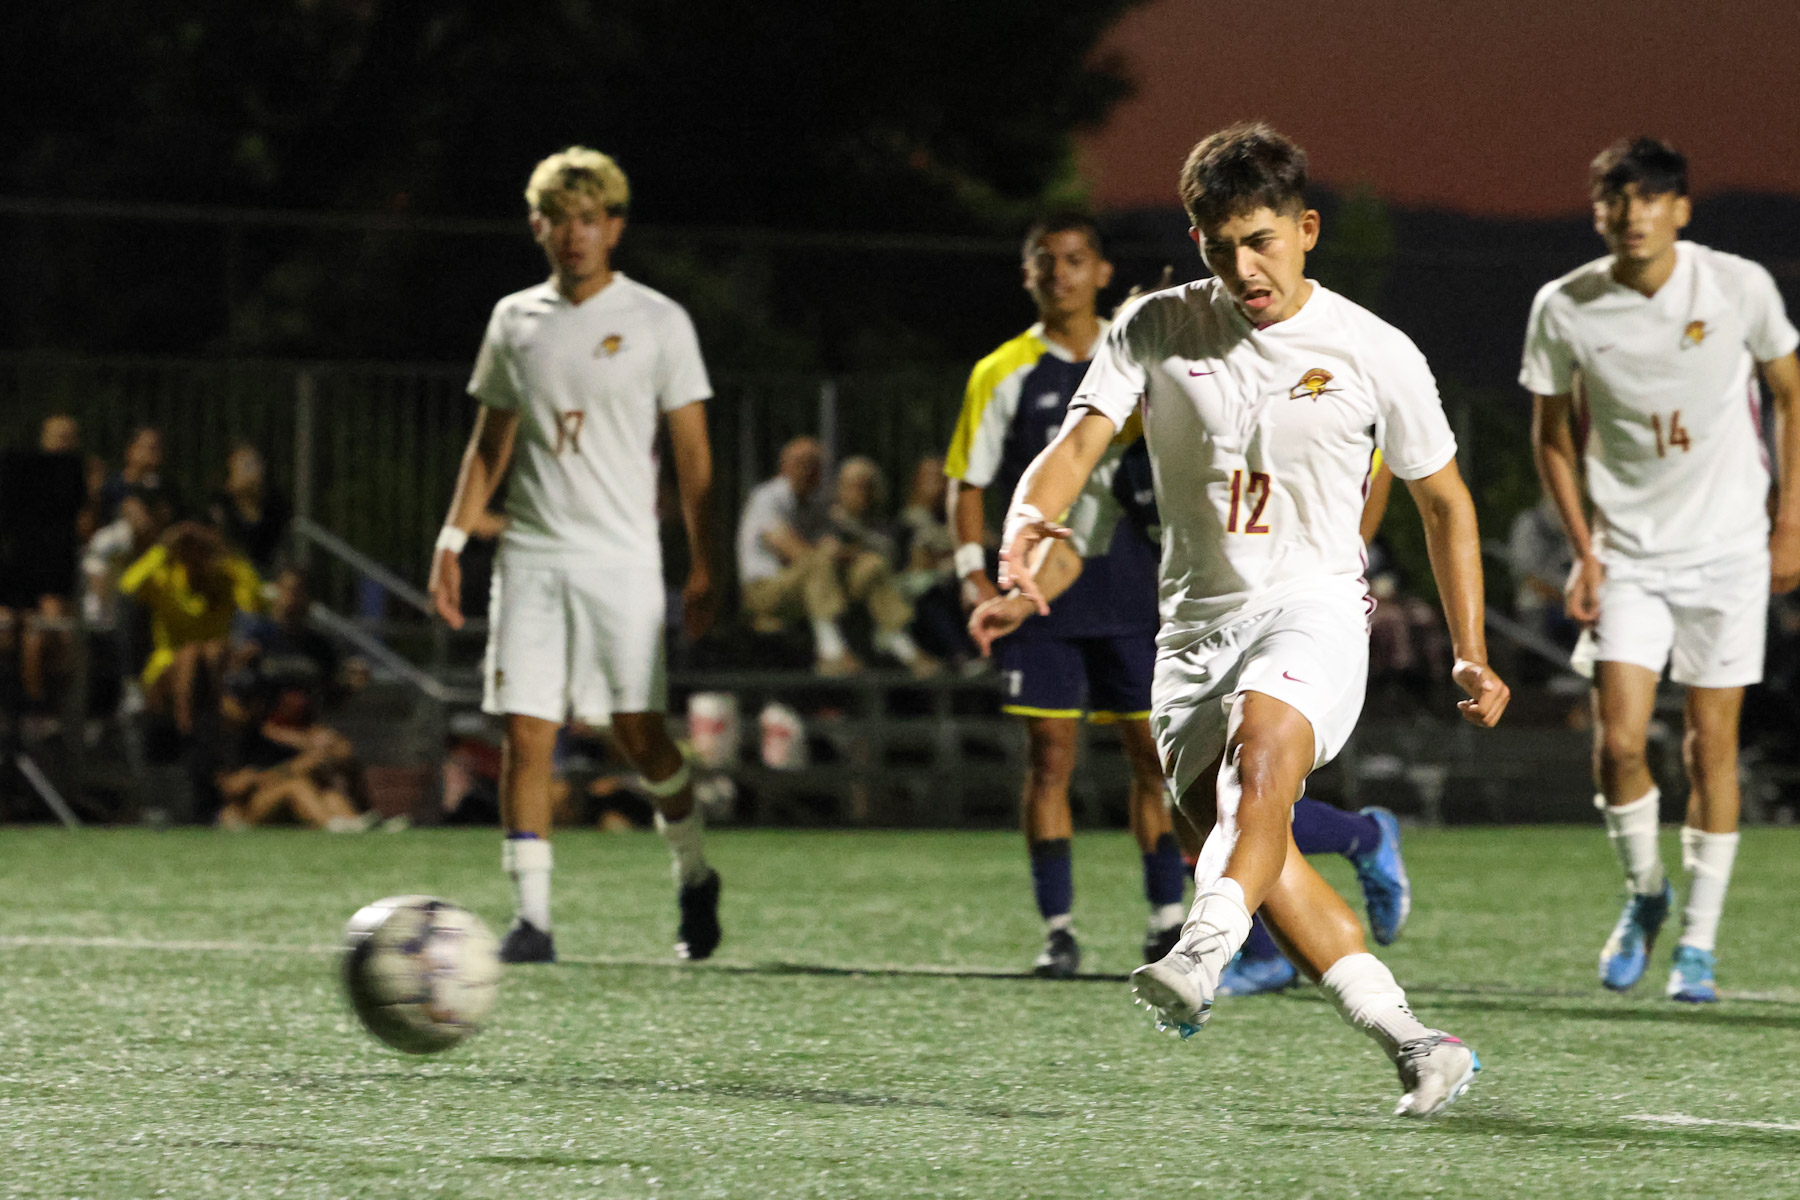 Jorge Cedillo scores on a PK here on his way to the natural hat trick at Canyons (photo by Richard Quinton).